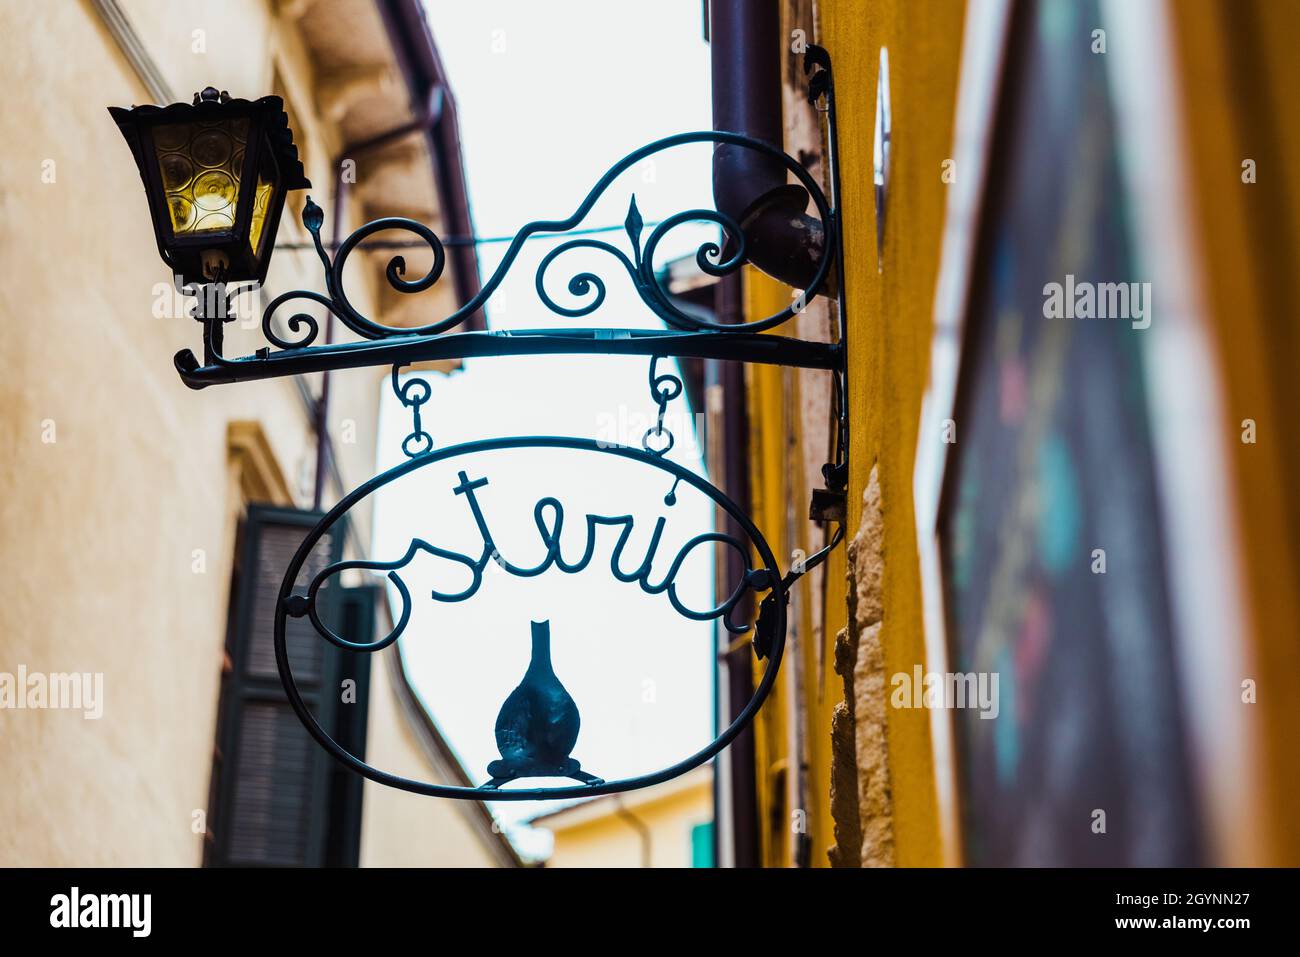 Verona, Italy - October 1, 2021: Street sign for a traditional Italian osteria where you can taste local wines. Stock Photo